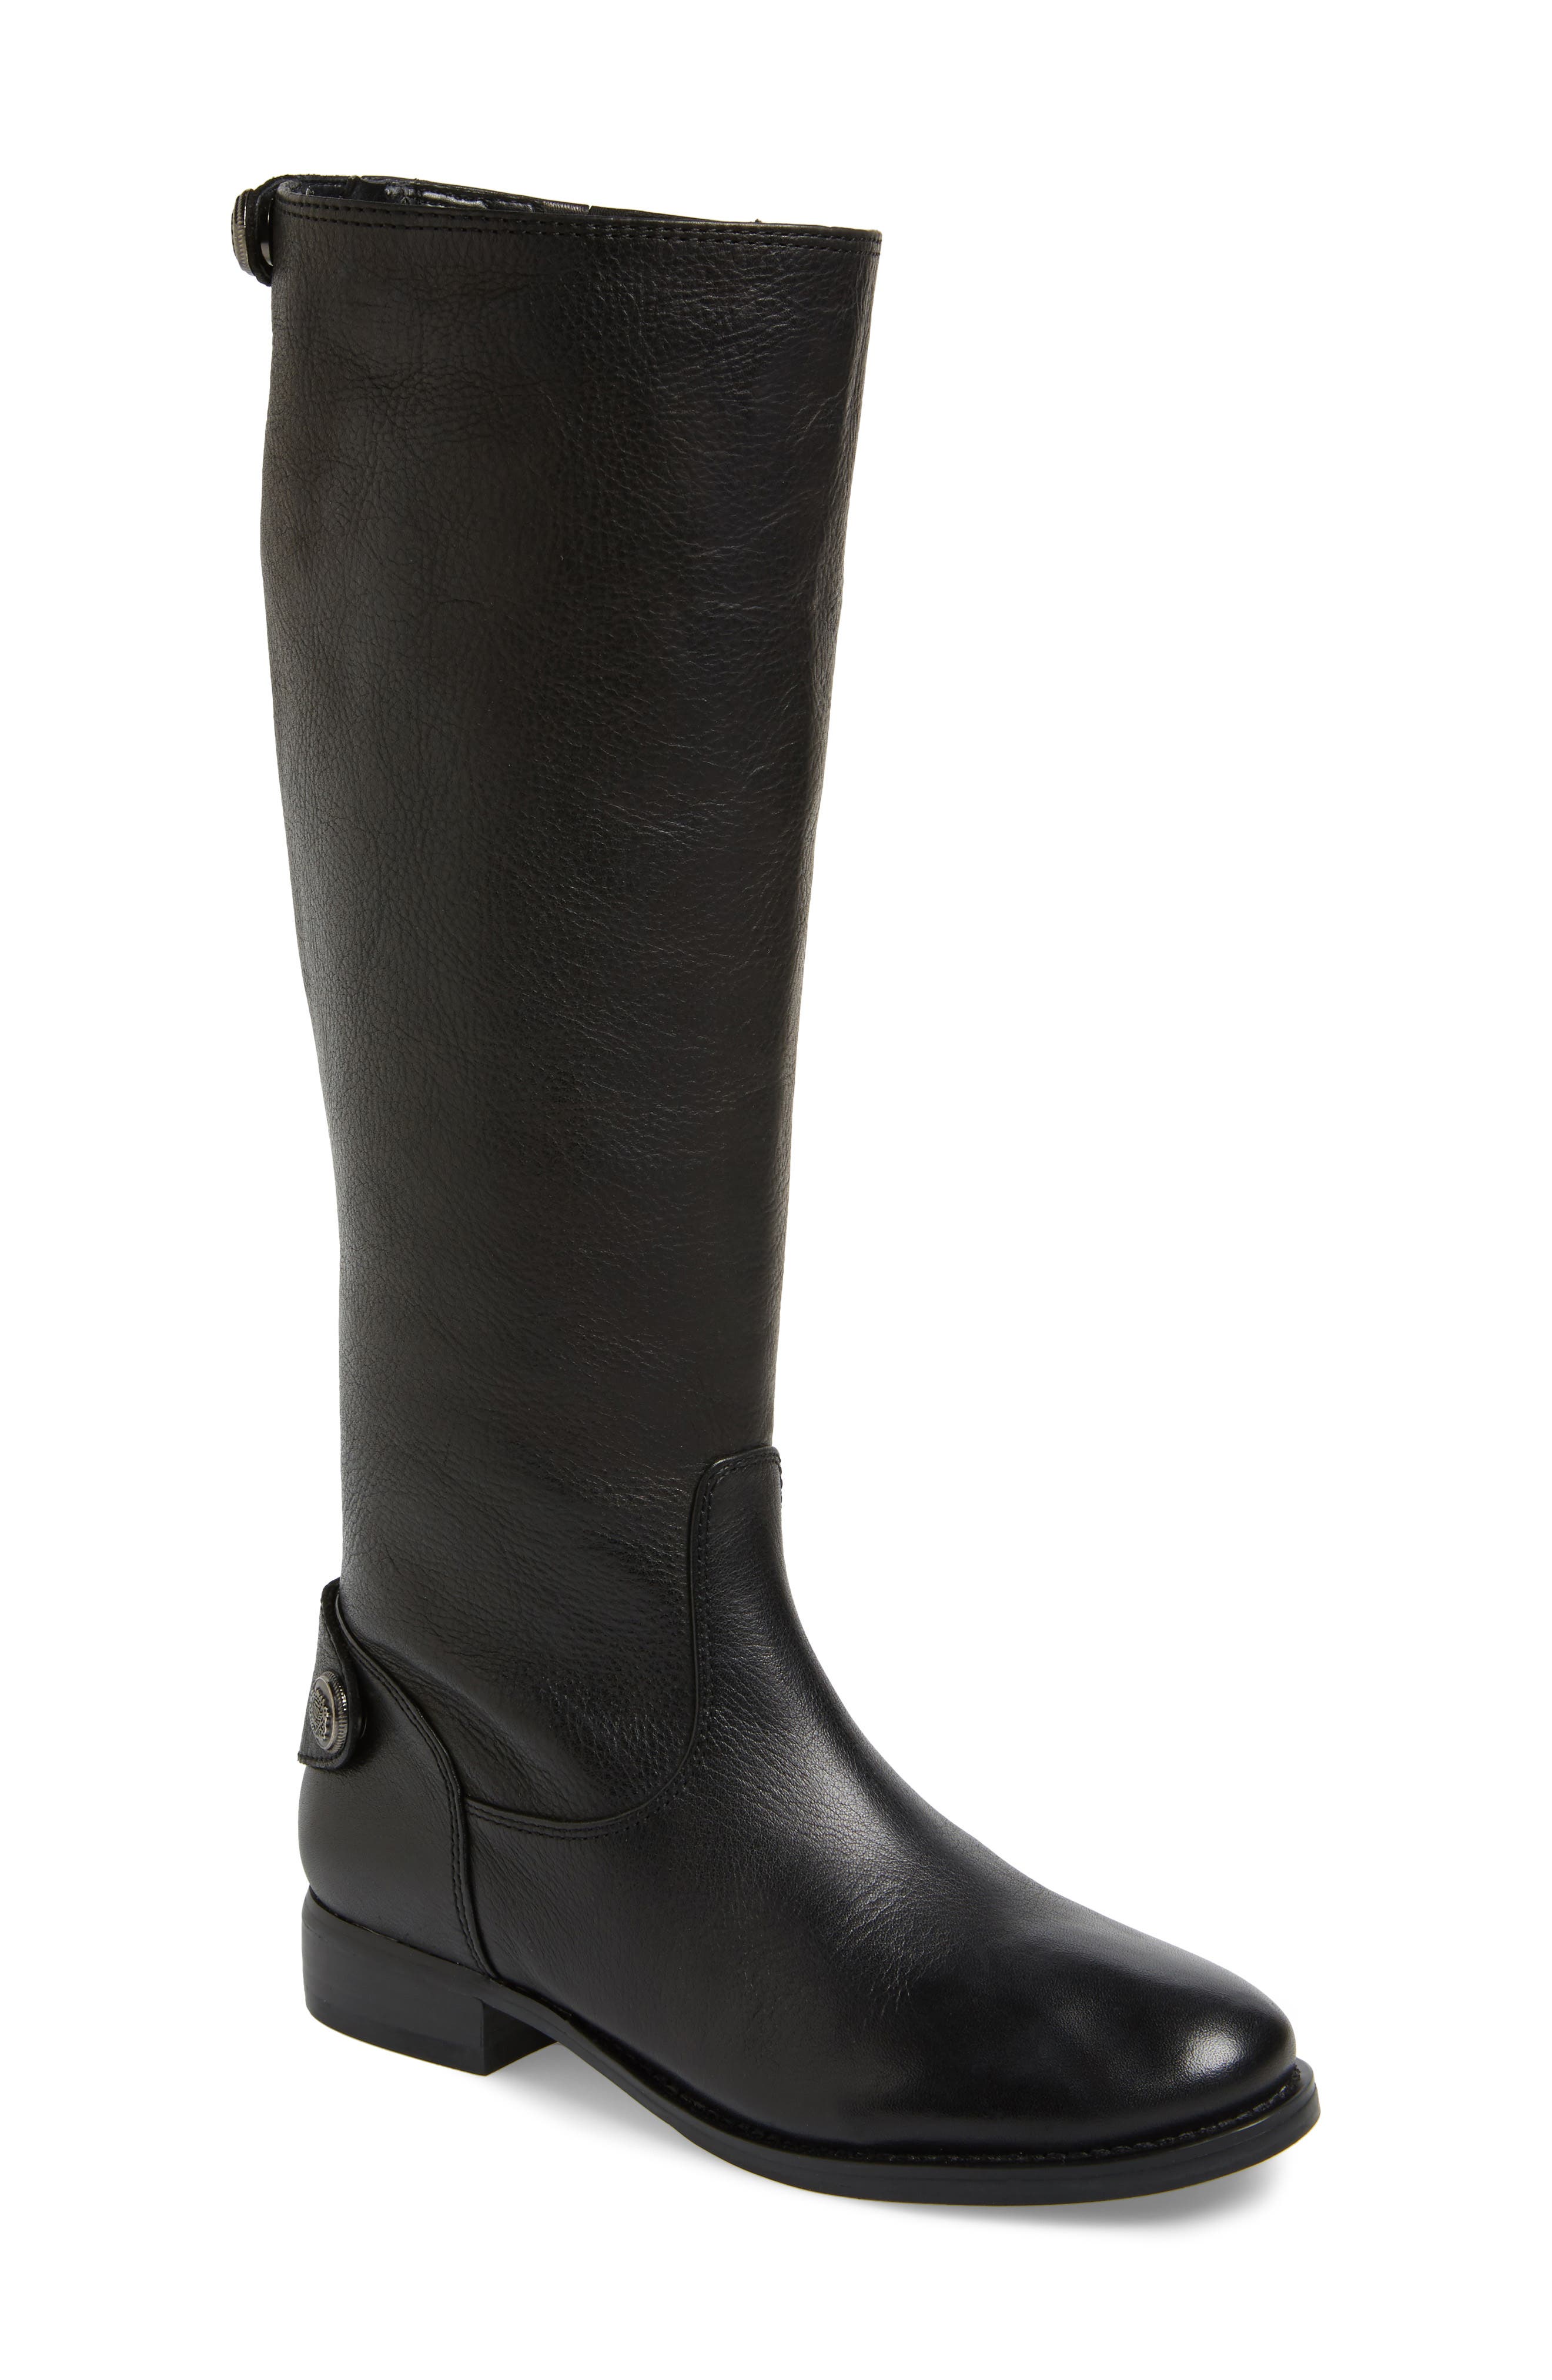 7s knee high boots